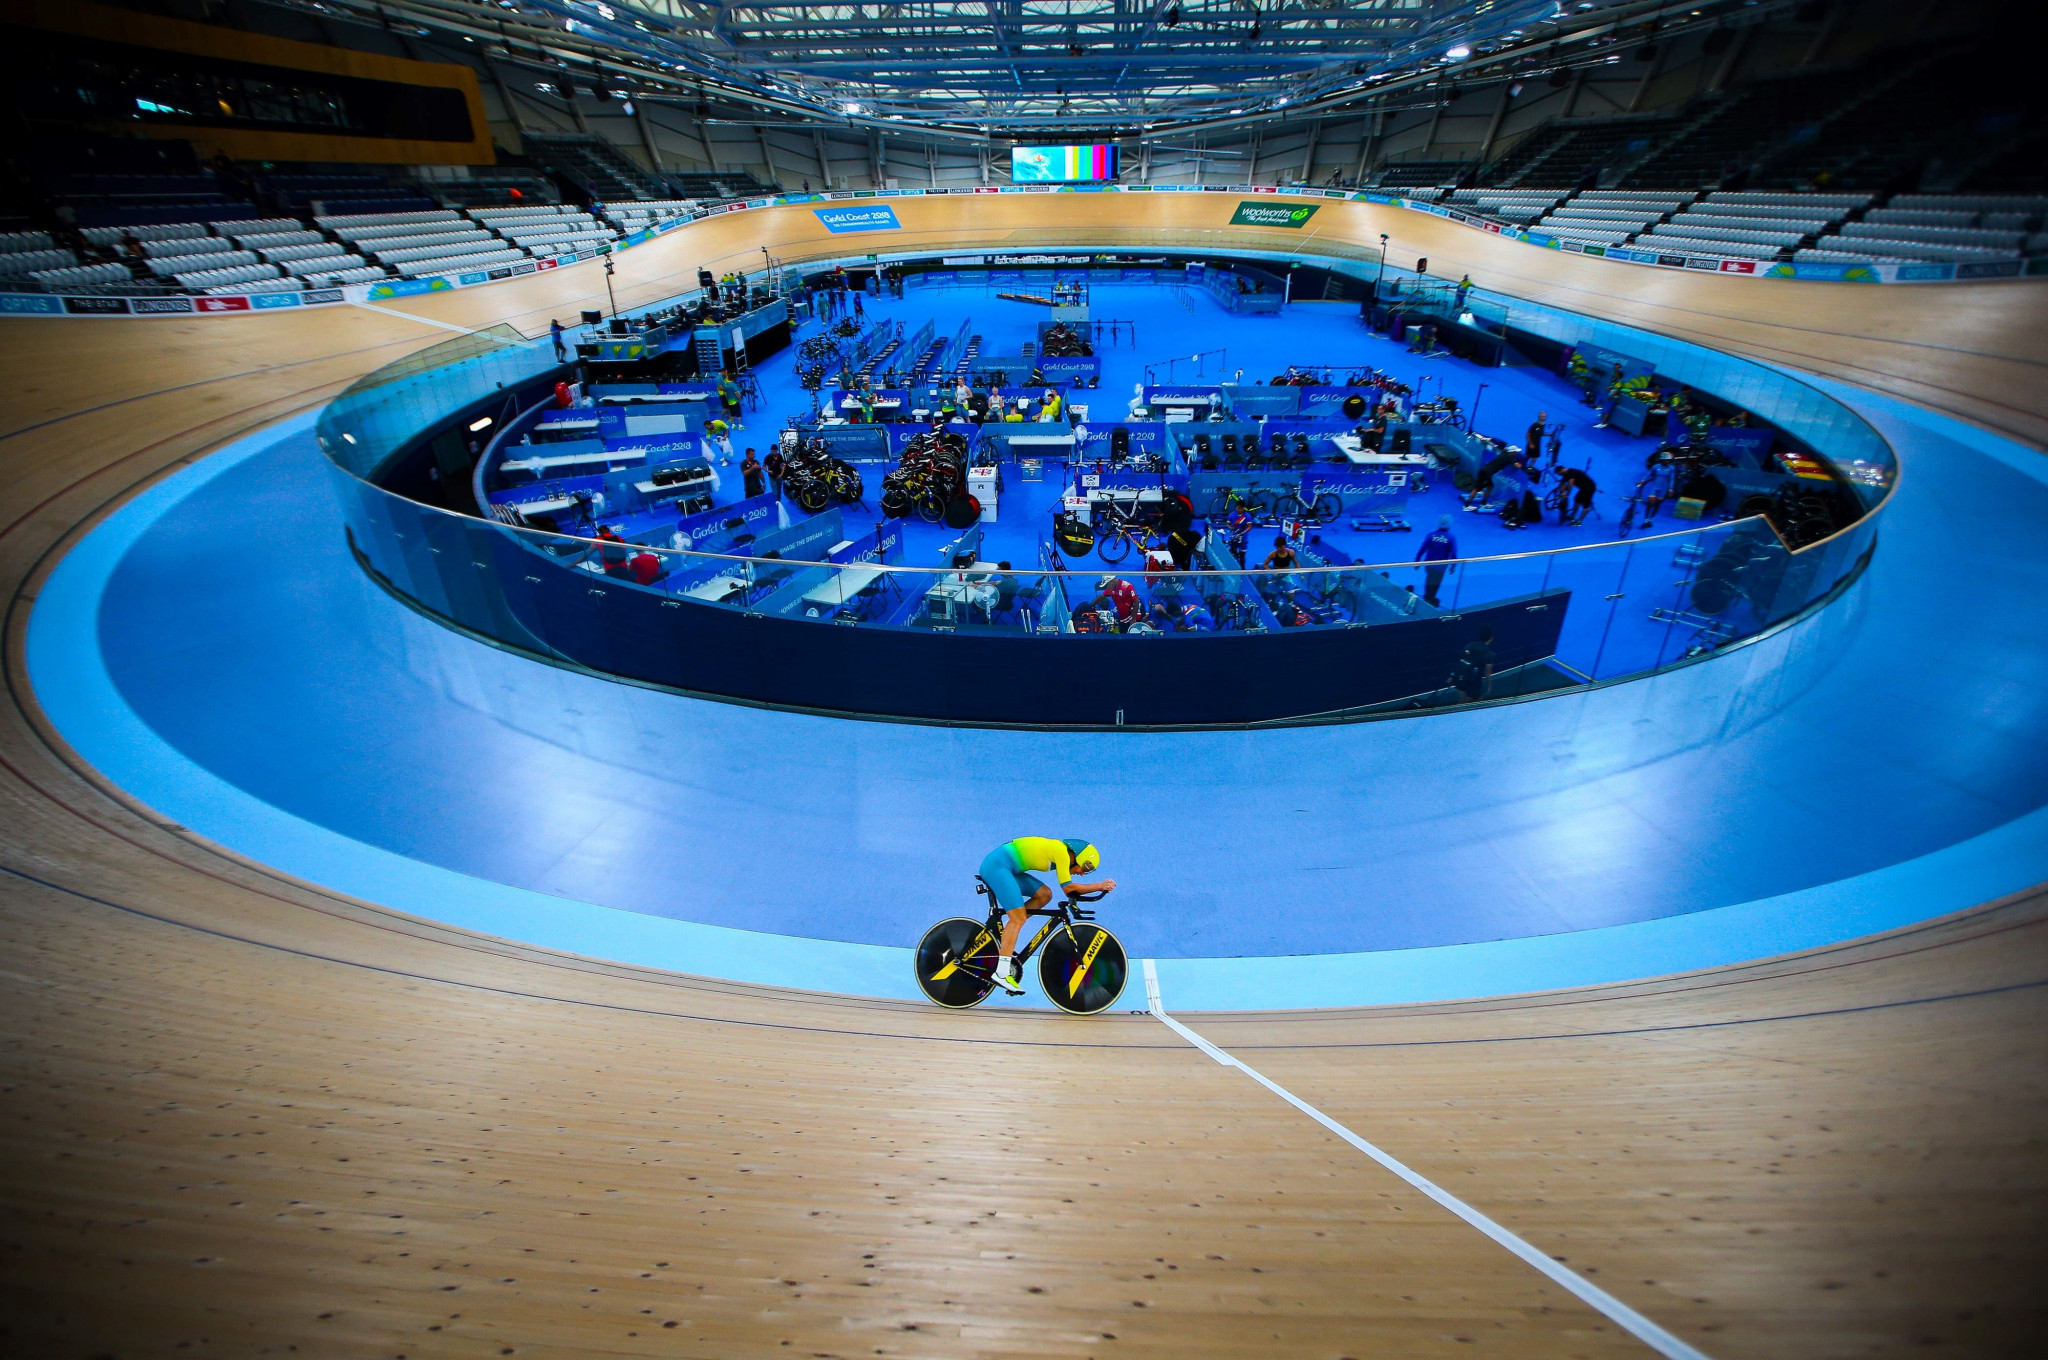 The Oceania Track Cycling Championships are set to take place in the Anna Meares Velodrome which hosted events at the Gold Coast 2018 Commonwealth Games ©Getty Images